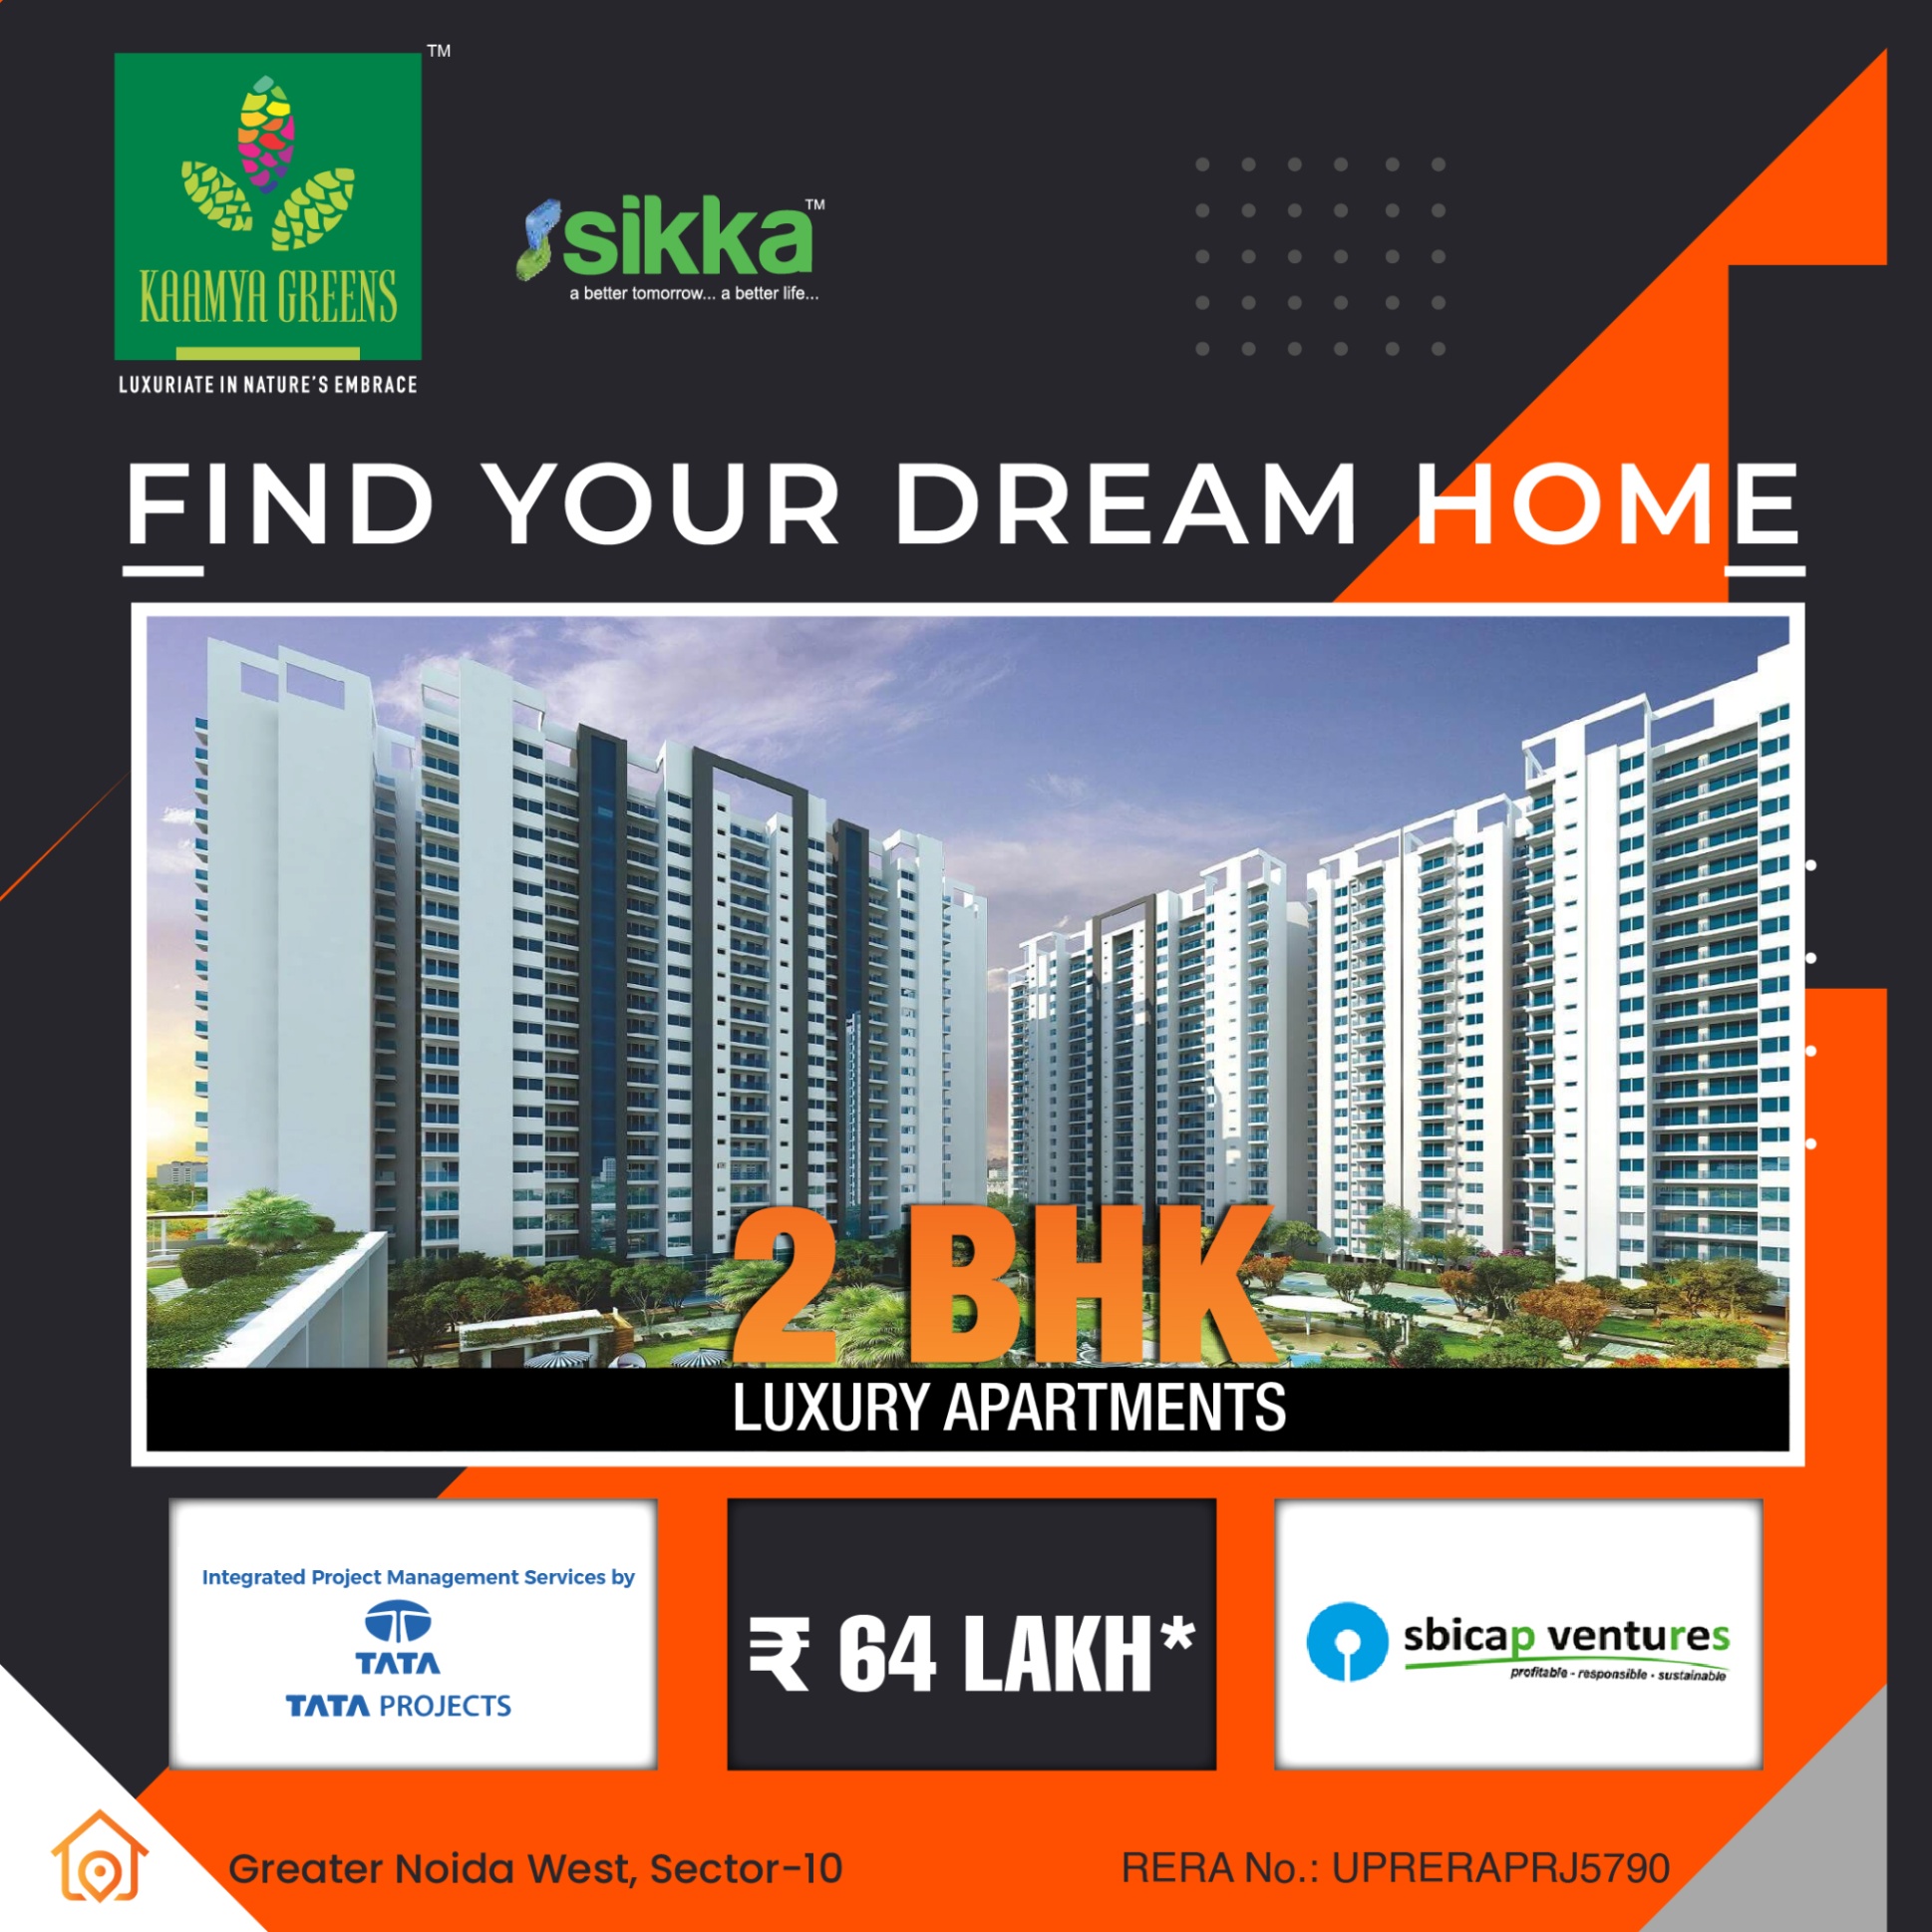 Deluxe 3 BHK Apartments by Sikka Kaamya Greens in Greater Noida West